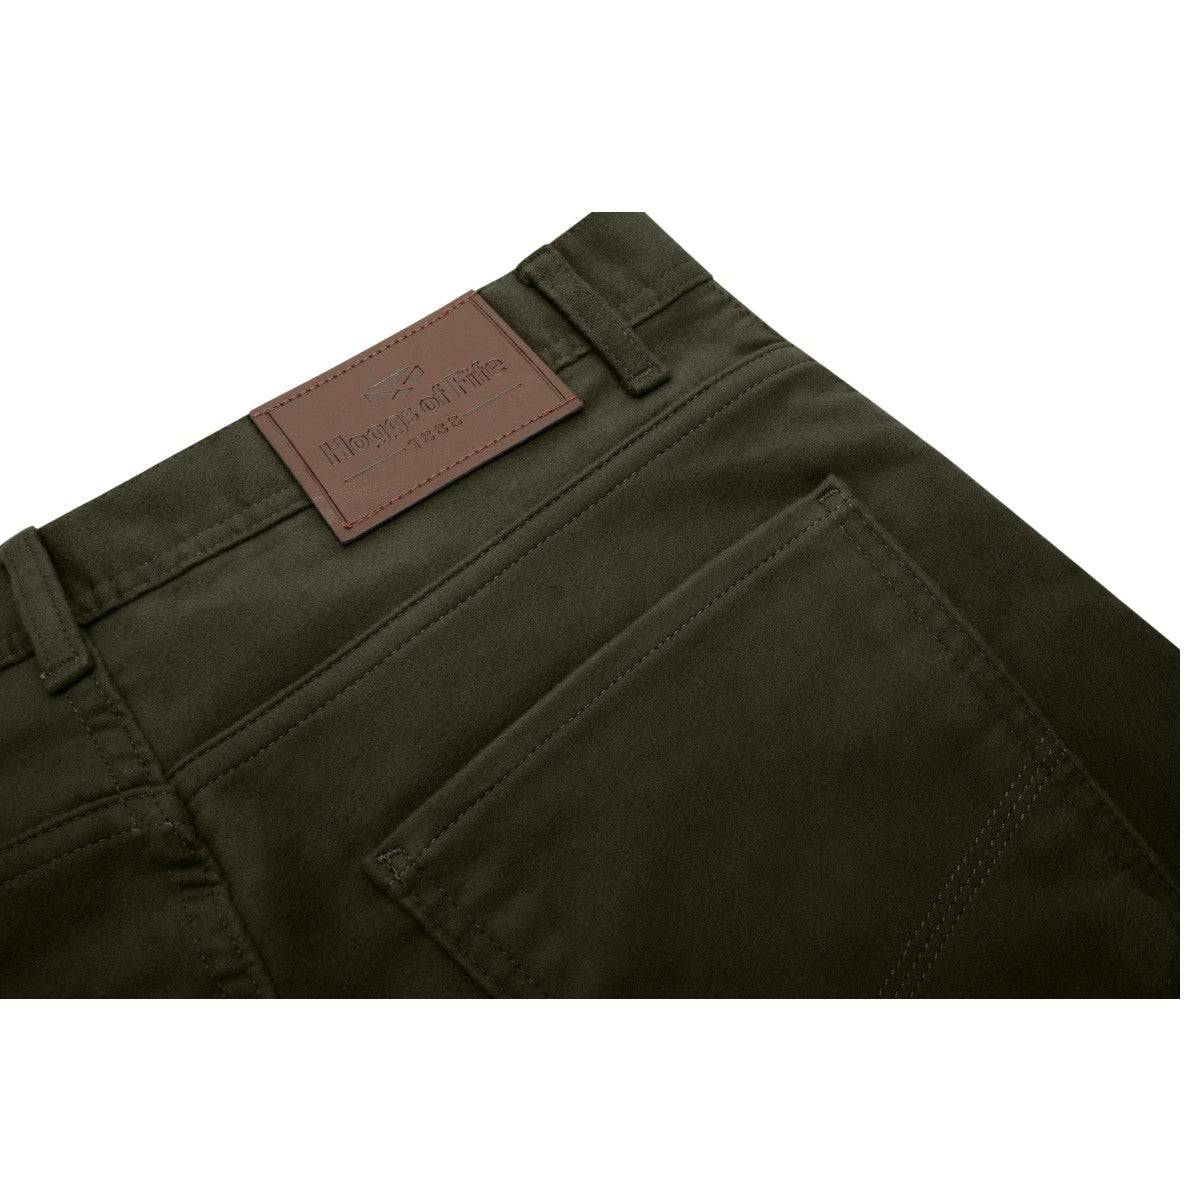 Hoggs Of Fife Carrick Technical Stretch Moleskin Jean | Cluny Country 